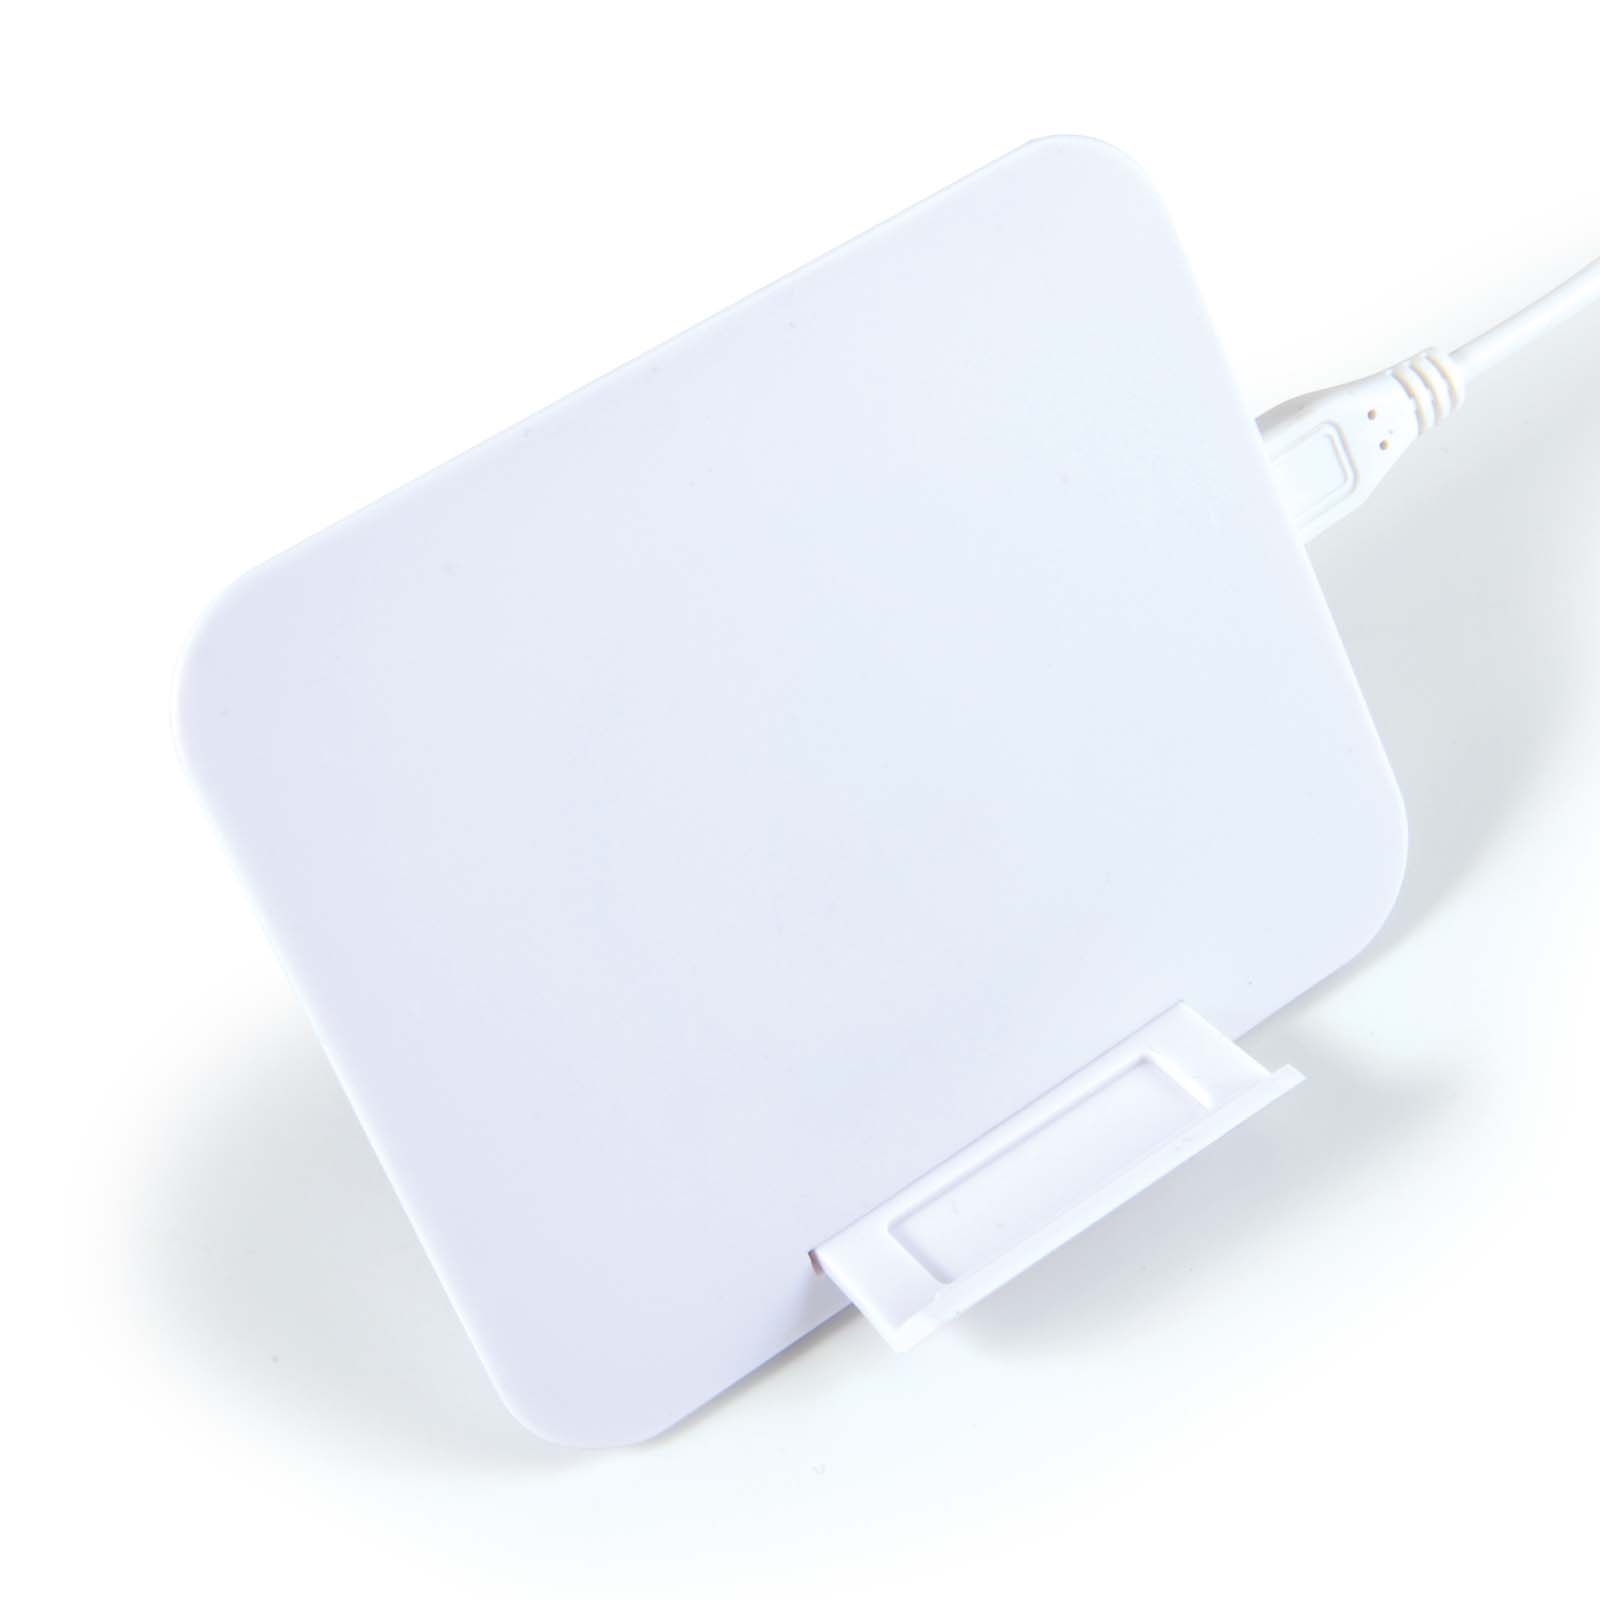 LL4 Proton Wireless Charger charger